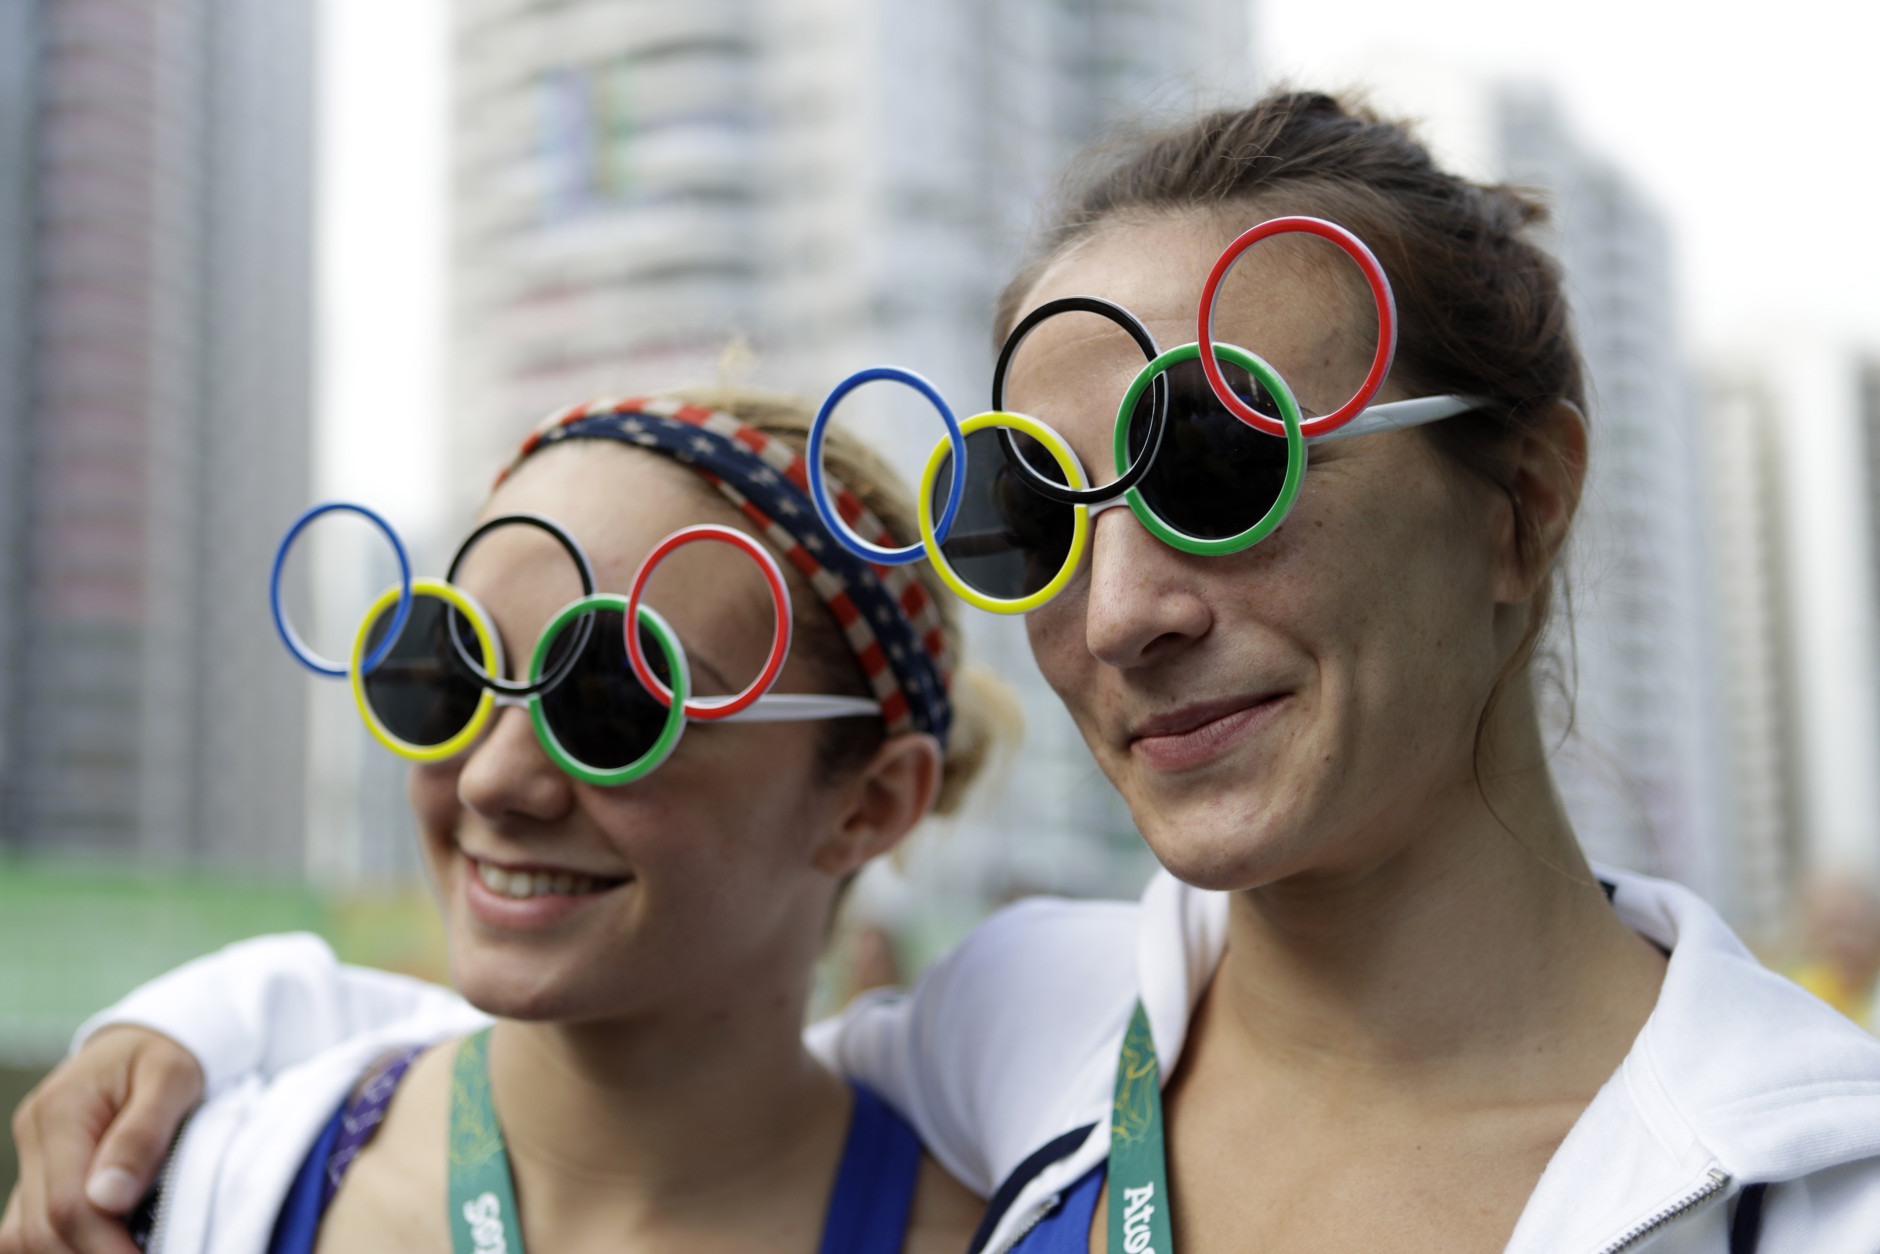 Judo competitors Angelica Delgado, of Miami, left, and Marti Malloy, of Oak Harbor, Wash., watch a welcoming ceremony at the 2016 Summer Olympics in Rio de Janeiro, Brazil, Wednesday, Aug. 3, 2016. (AP Photo/Robert F. Bukaty)